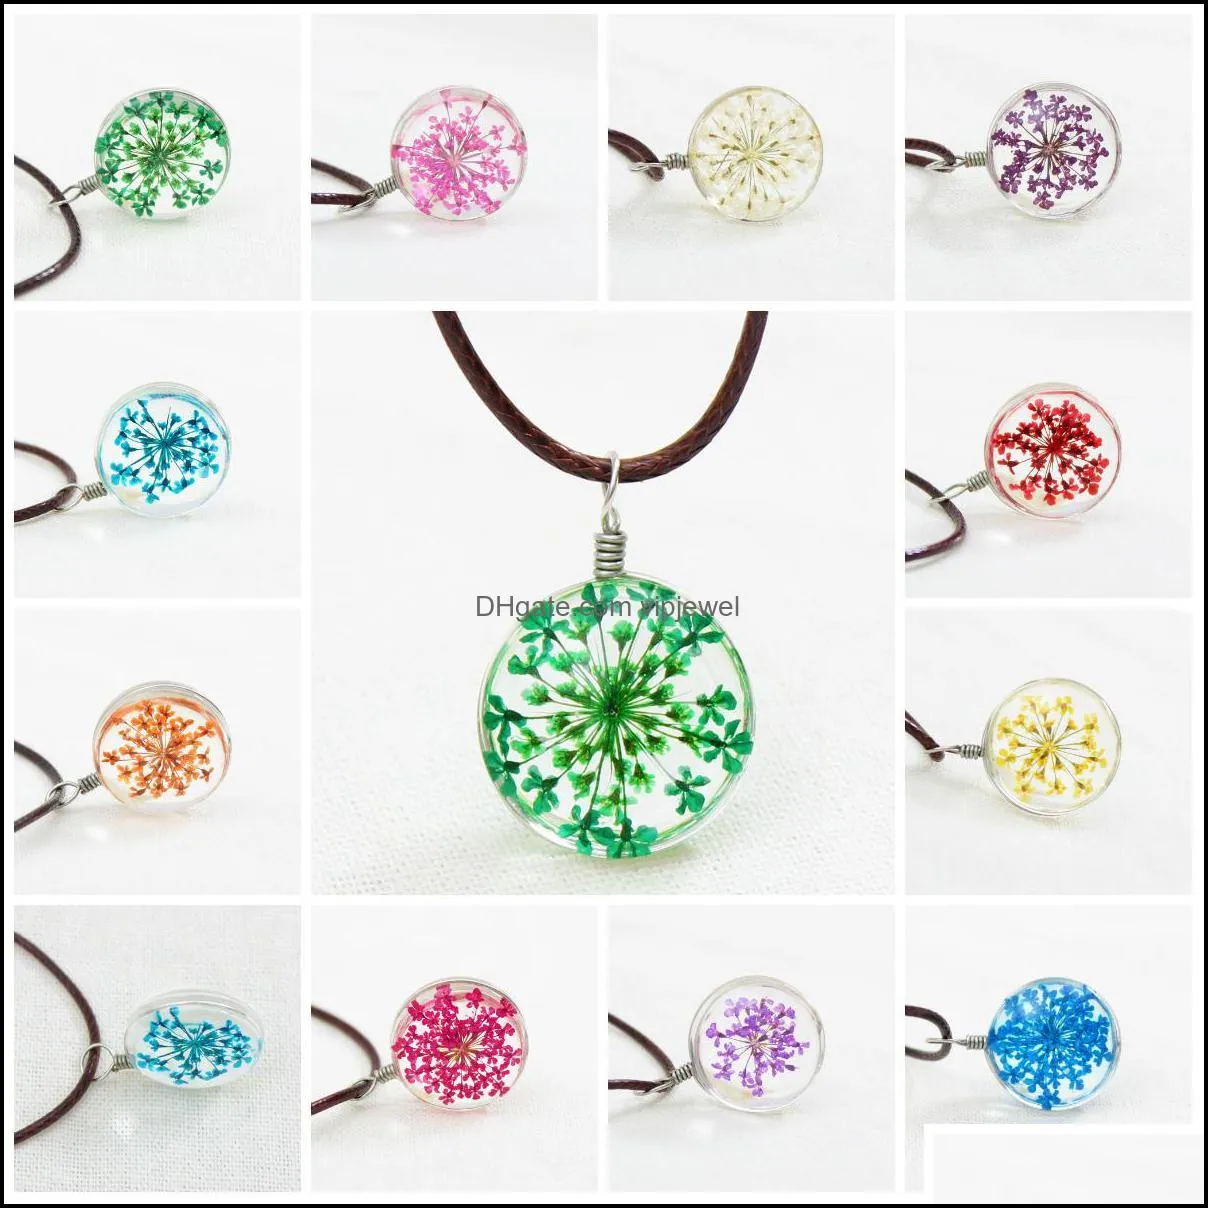 chokers necklaces for women leather ball crystal glass necklaces dried flowers pendant necklace vipjewel